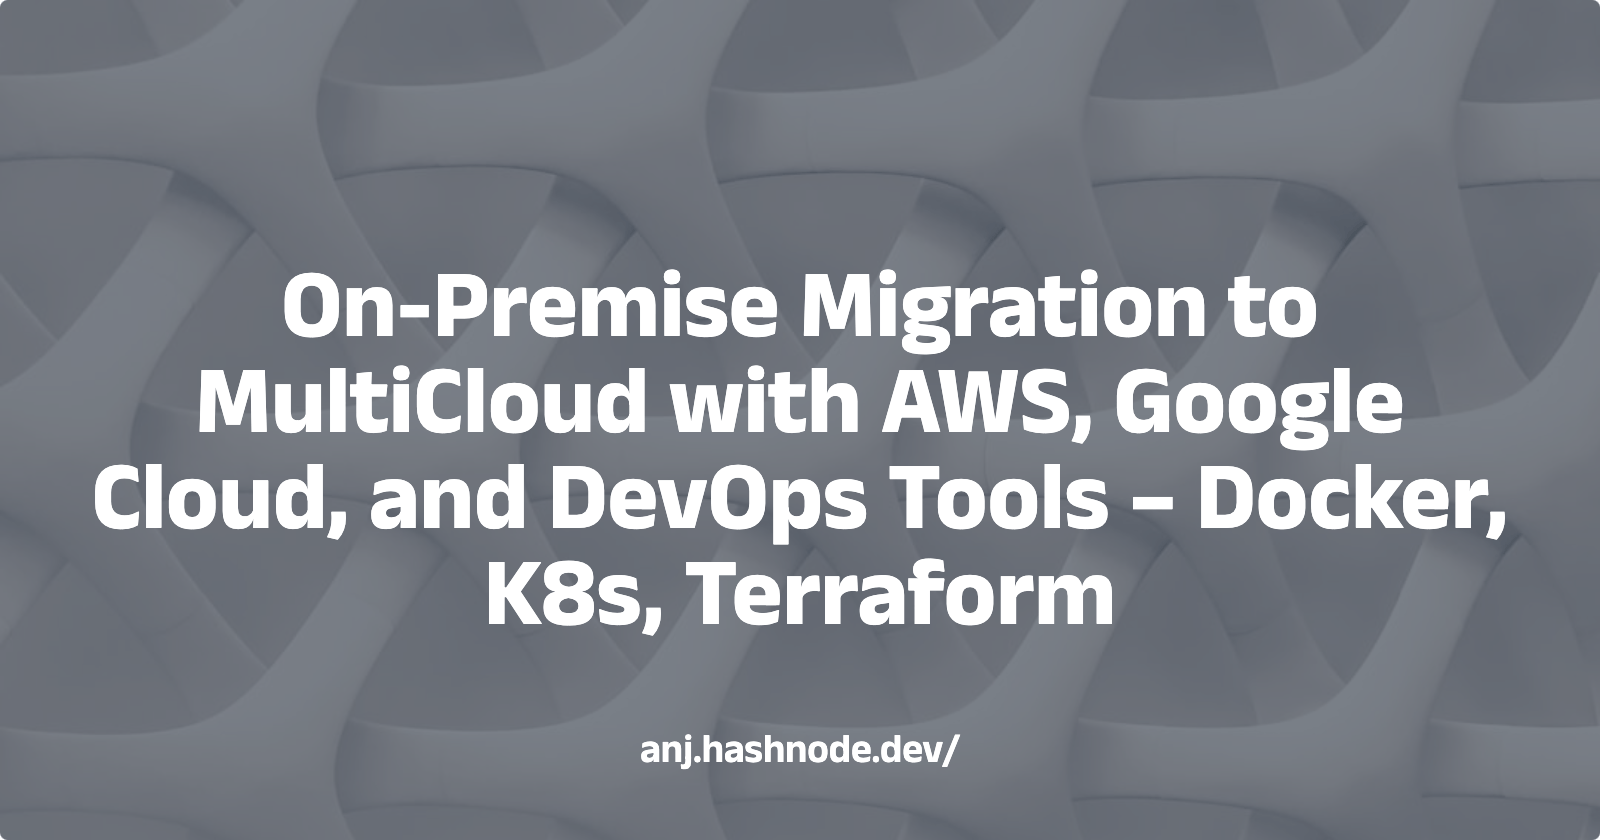 Unlocking the Basics: A Beginner's Project of On-Premise Migration to MultiCloud with AWS, Google Cloud, and DevOps Tools – Docker, K8s, Terraform